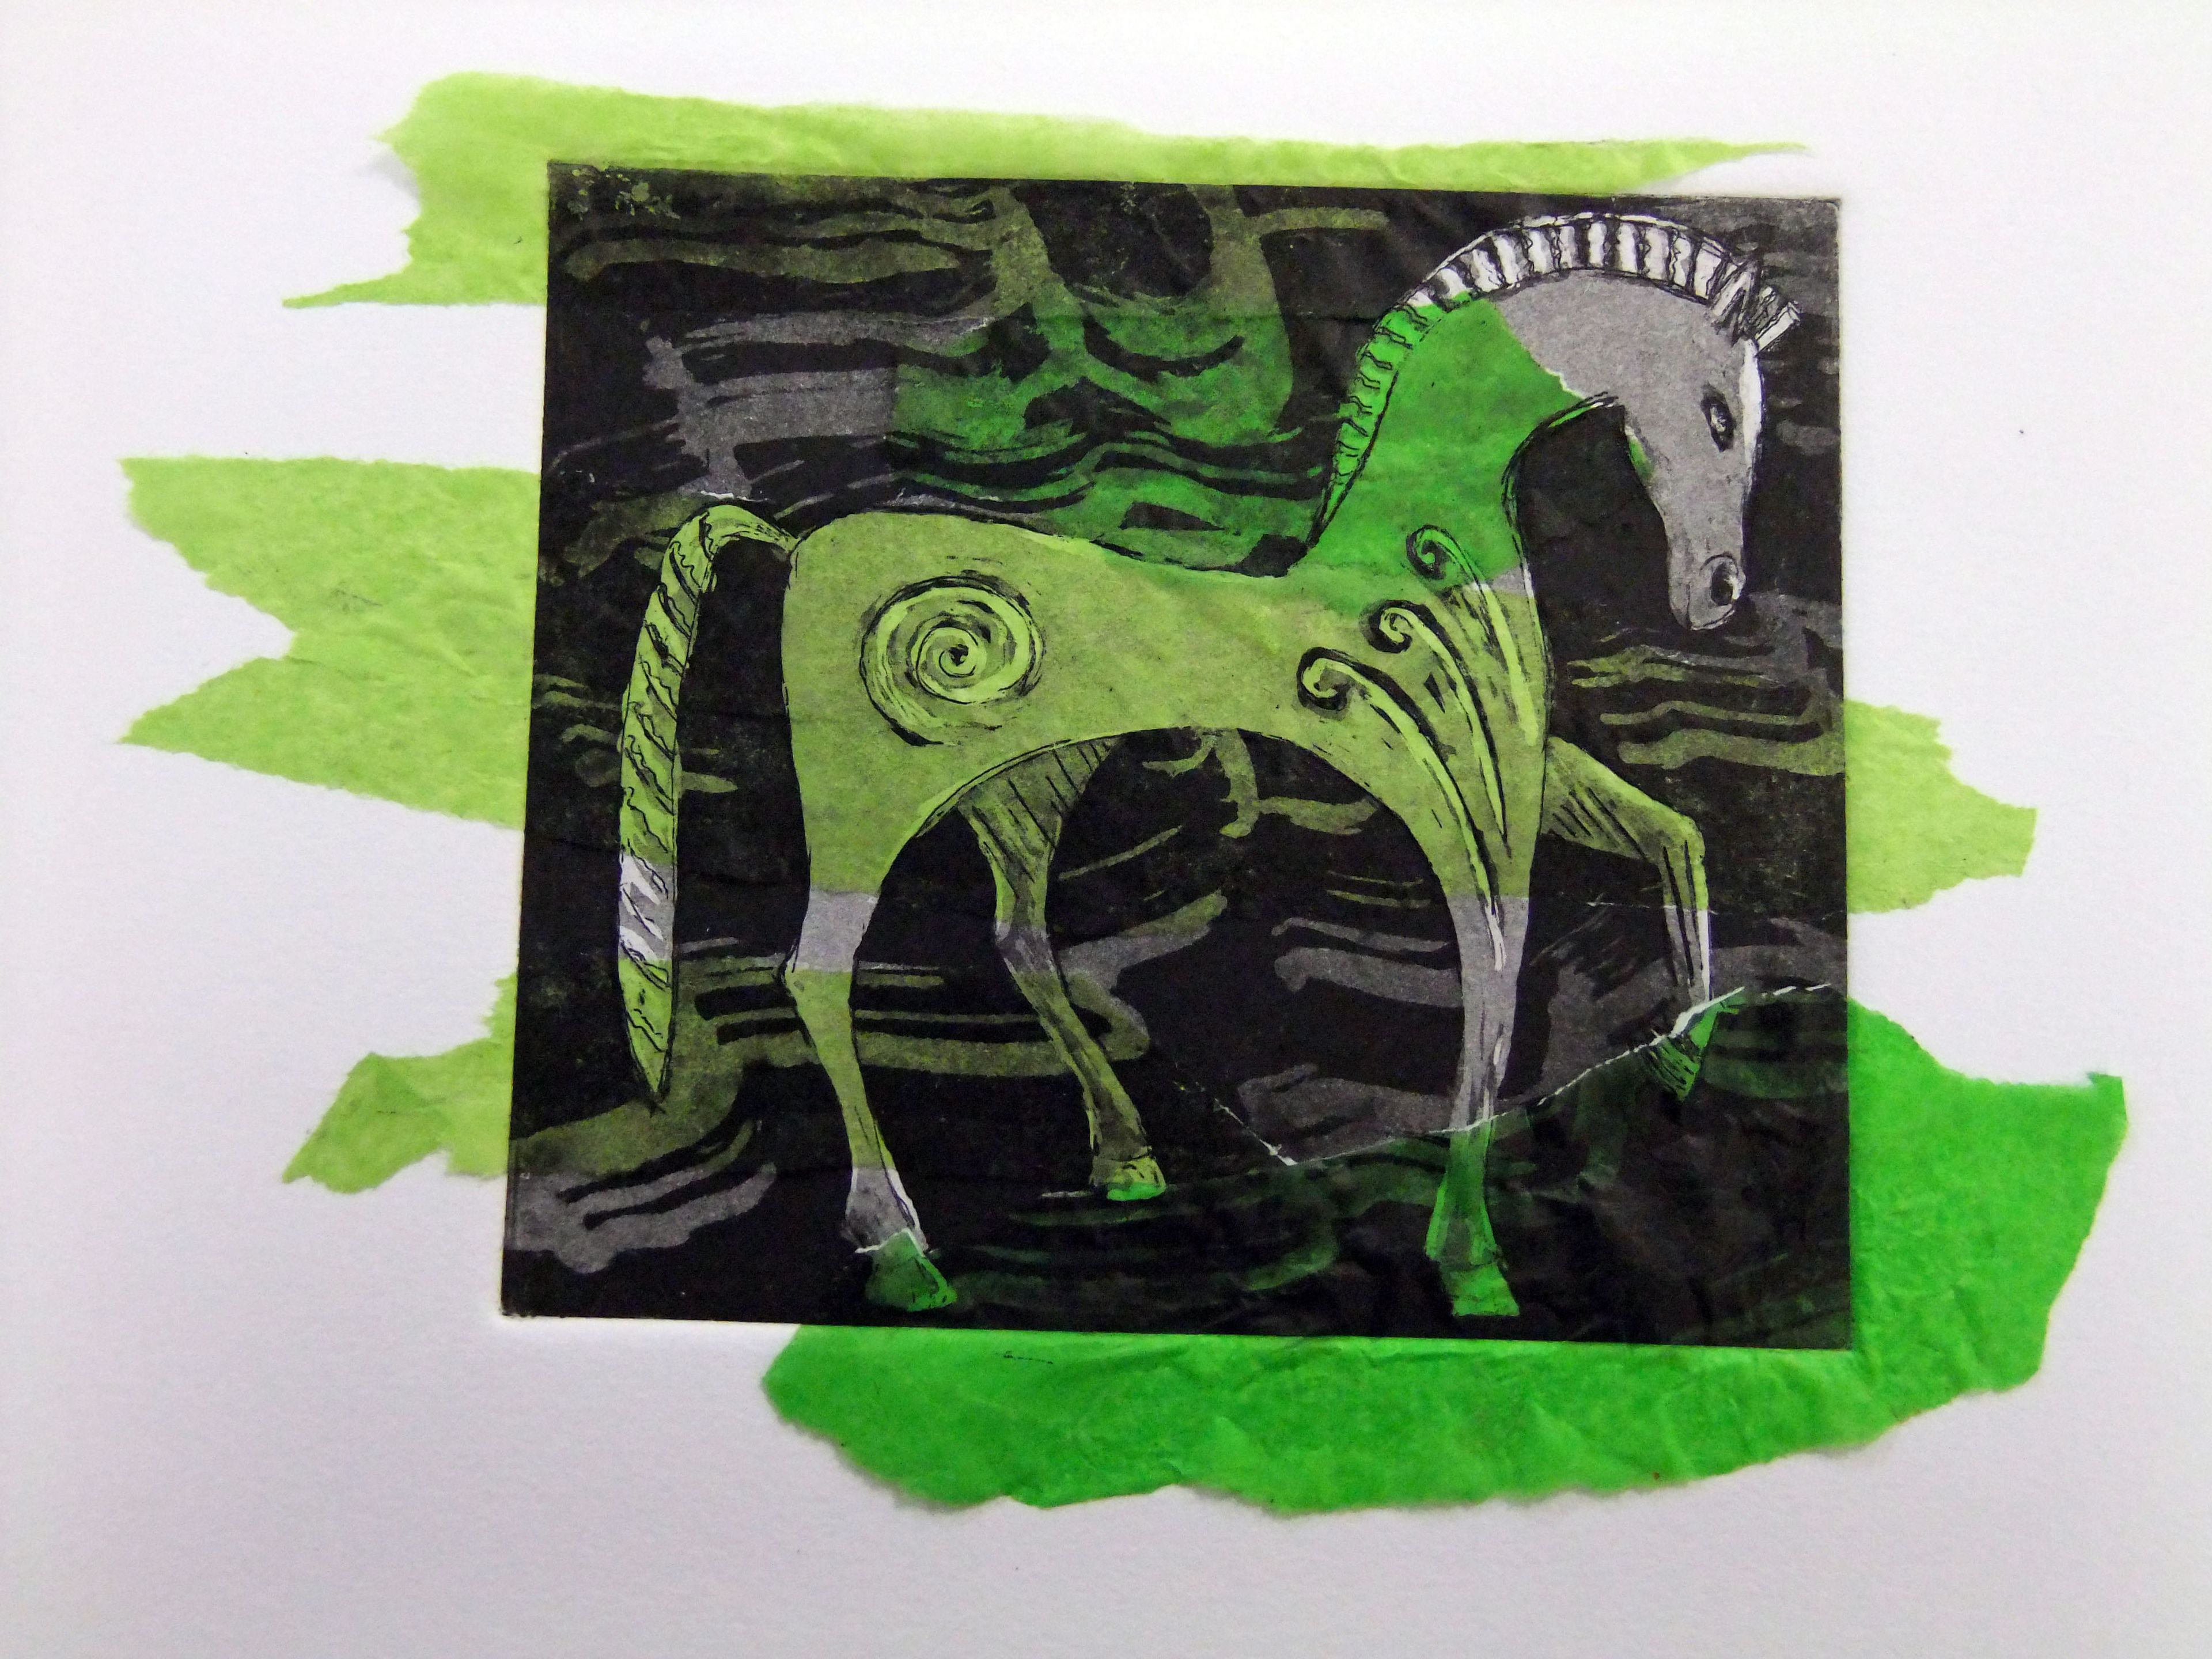 etching print of black and white horse with green ink surface